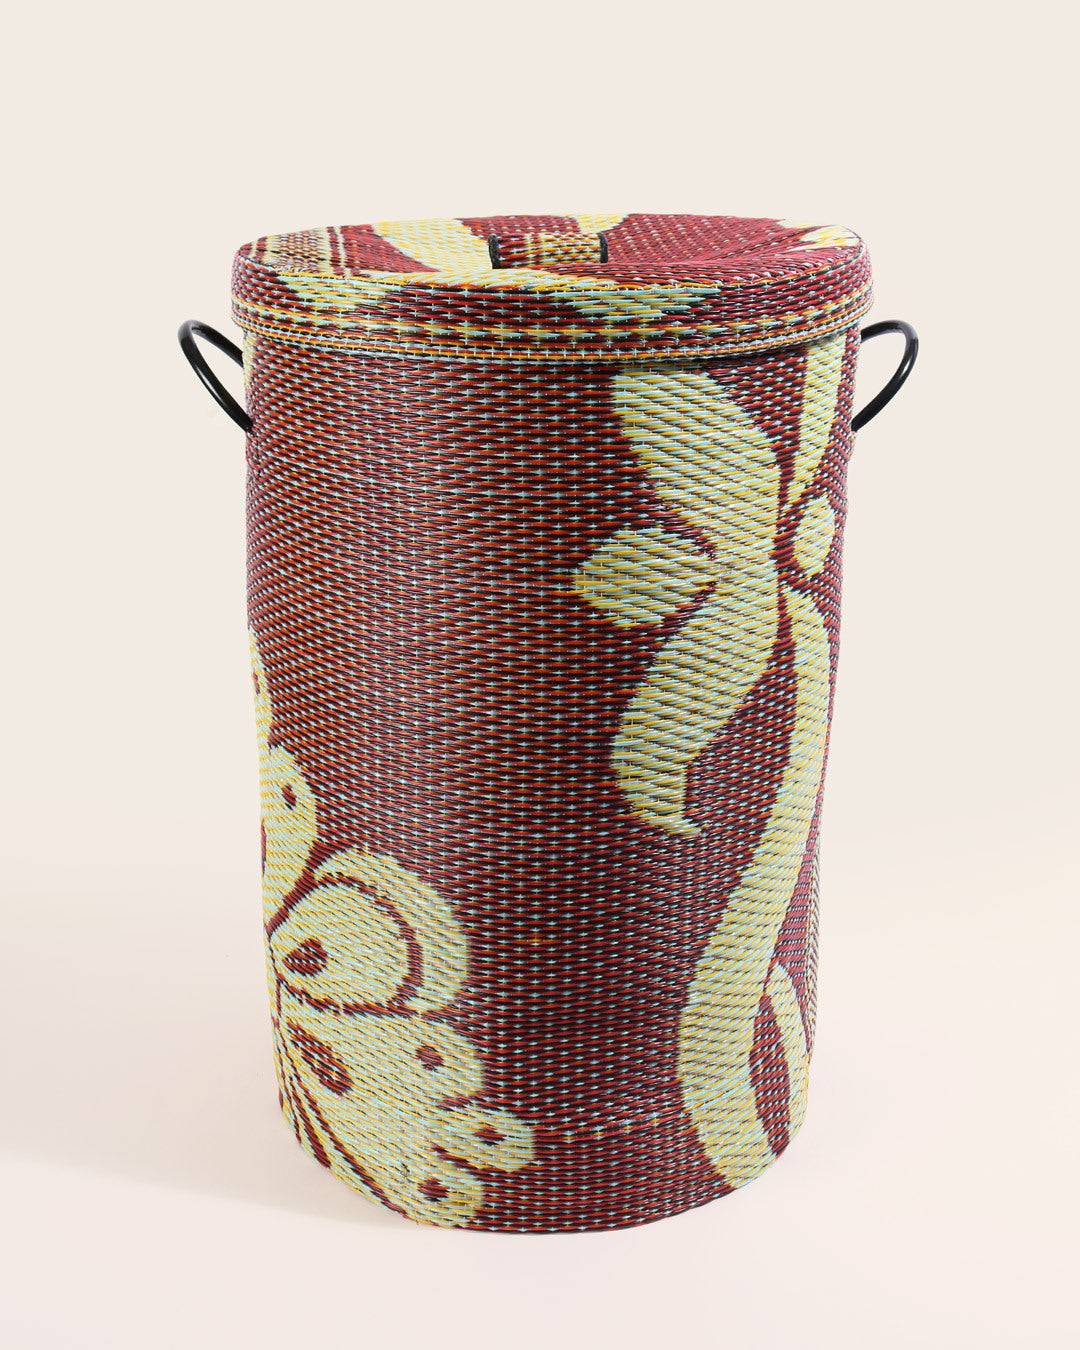 Handwoven Basket with Lid, No 22